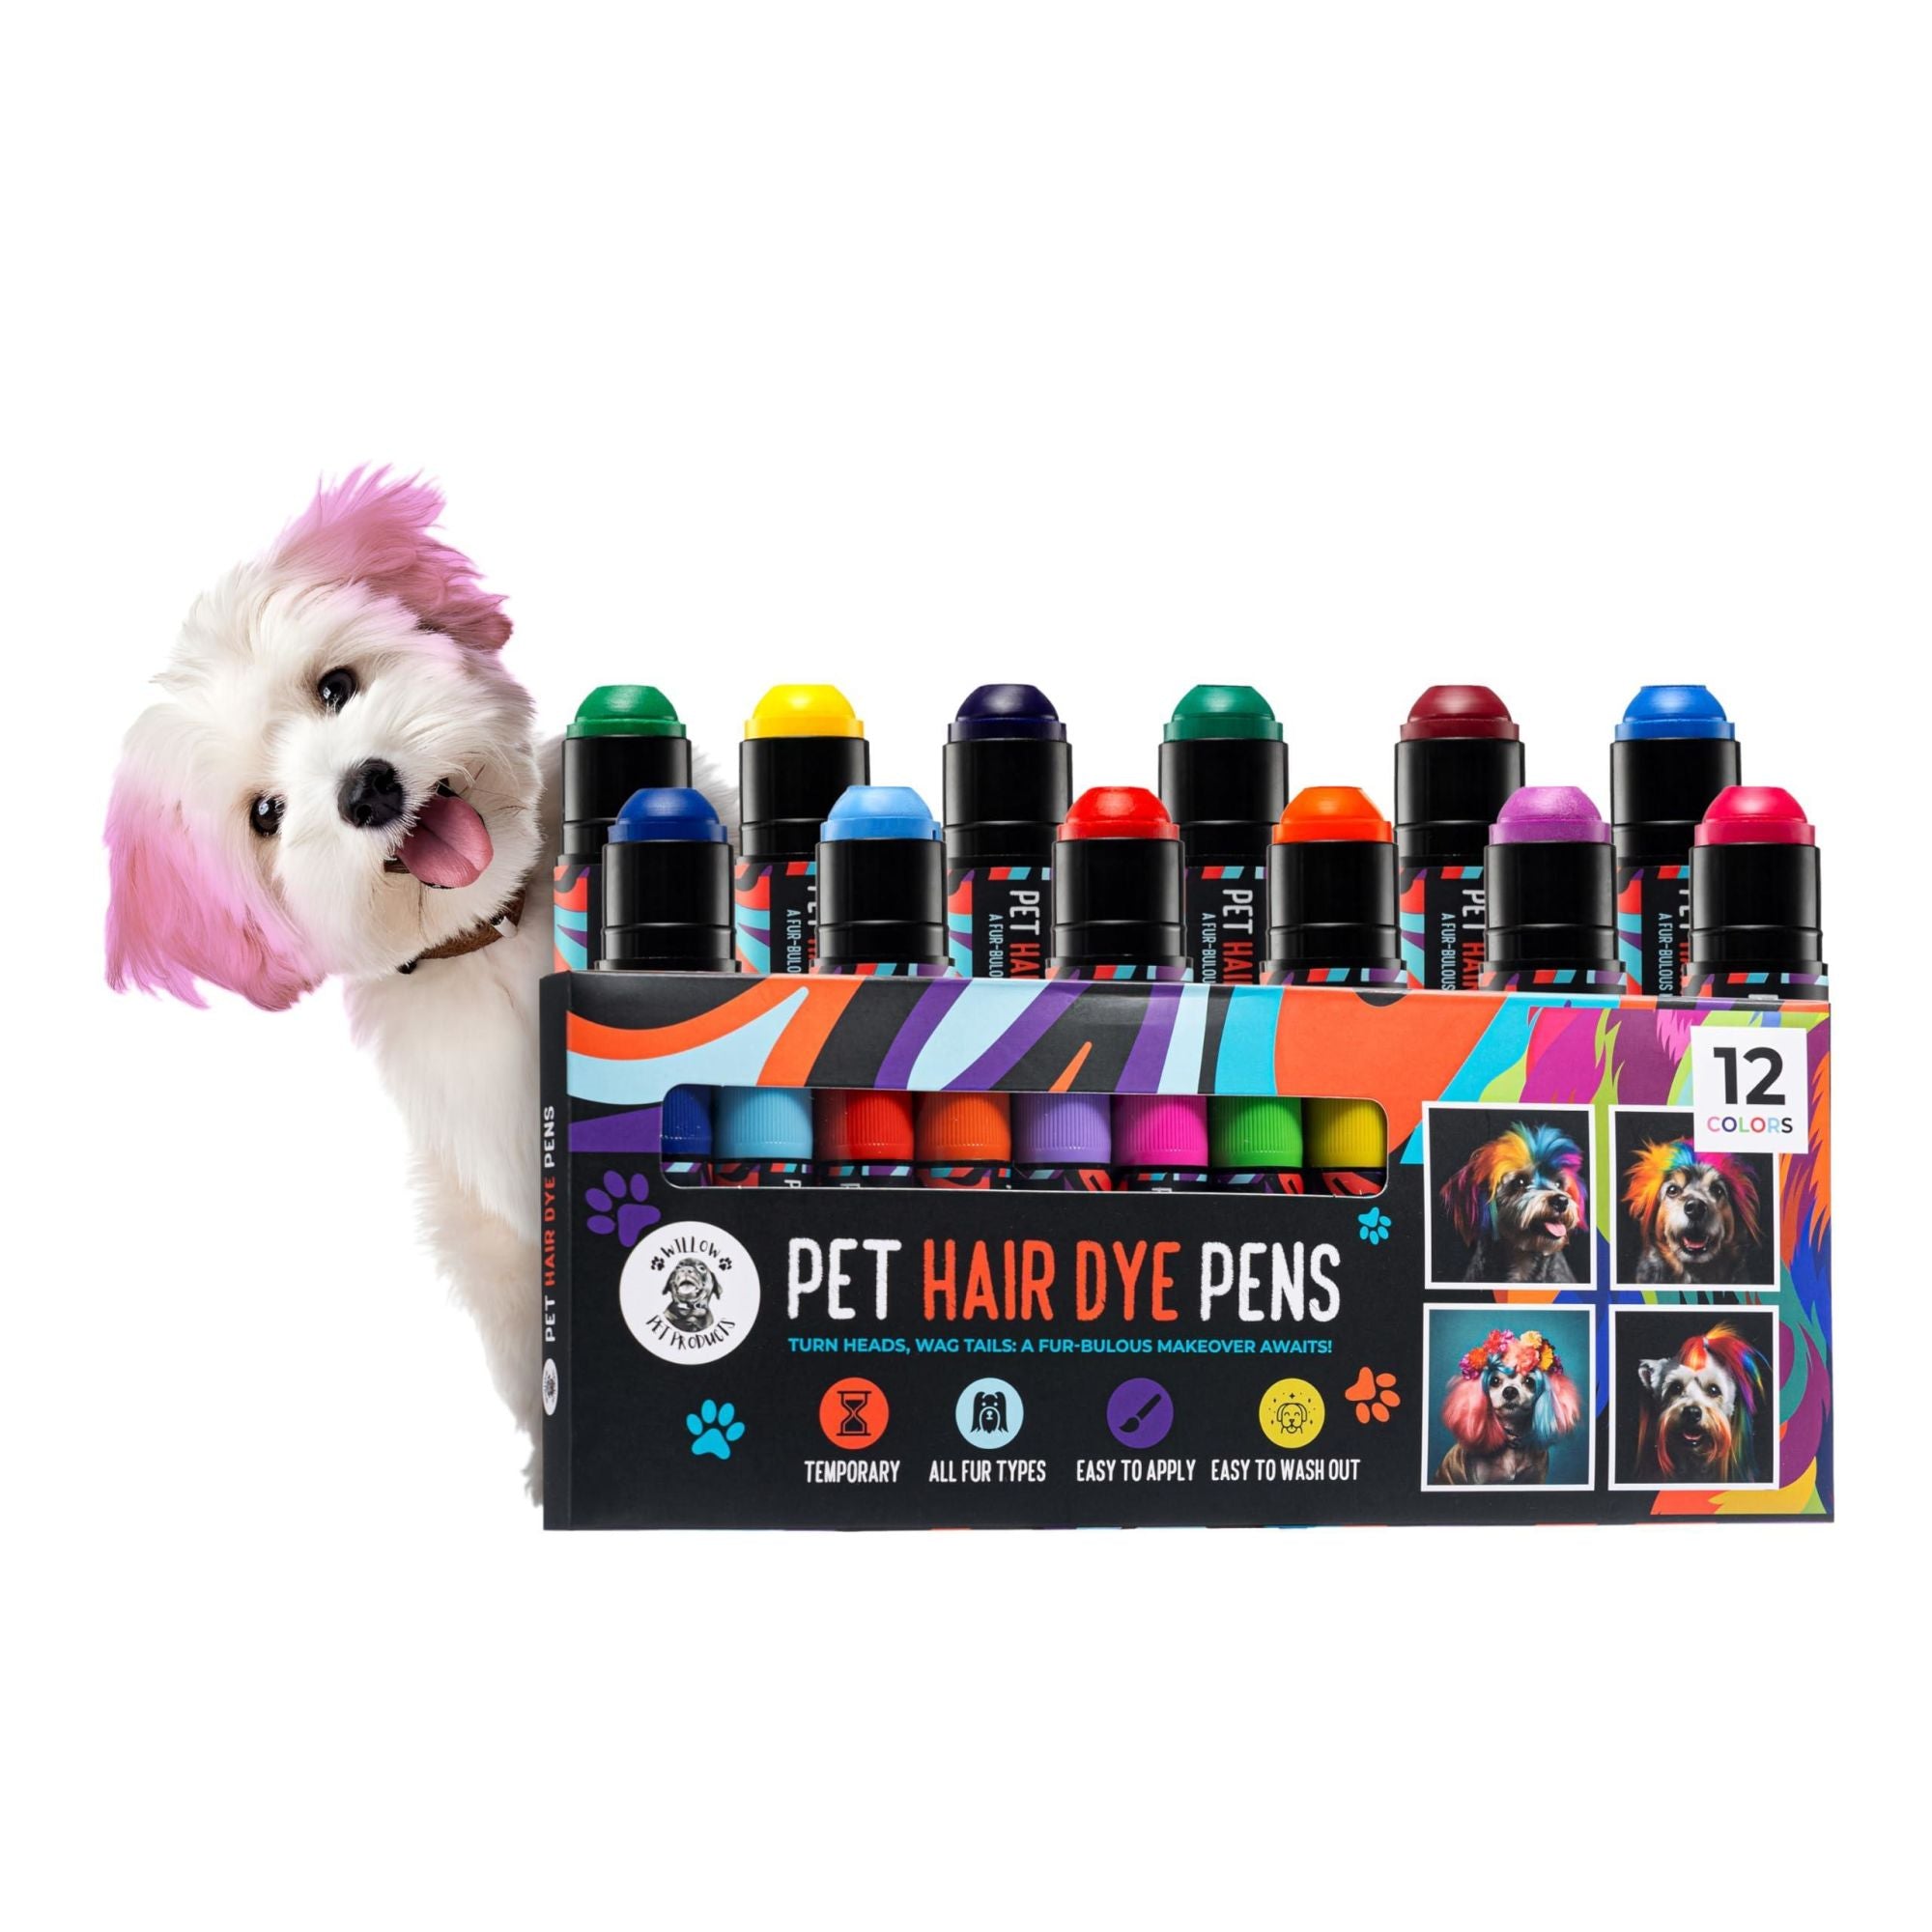 12 Vibrant Non Toxic and Temporary Pets Hair Dyes